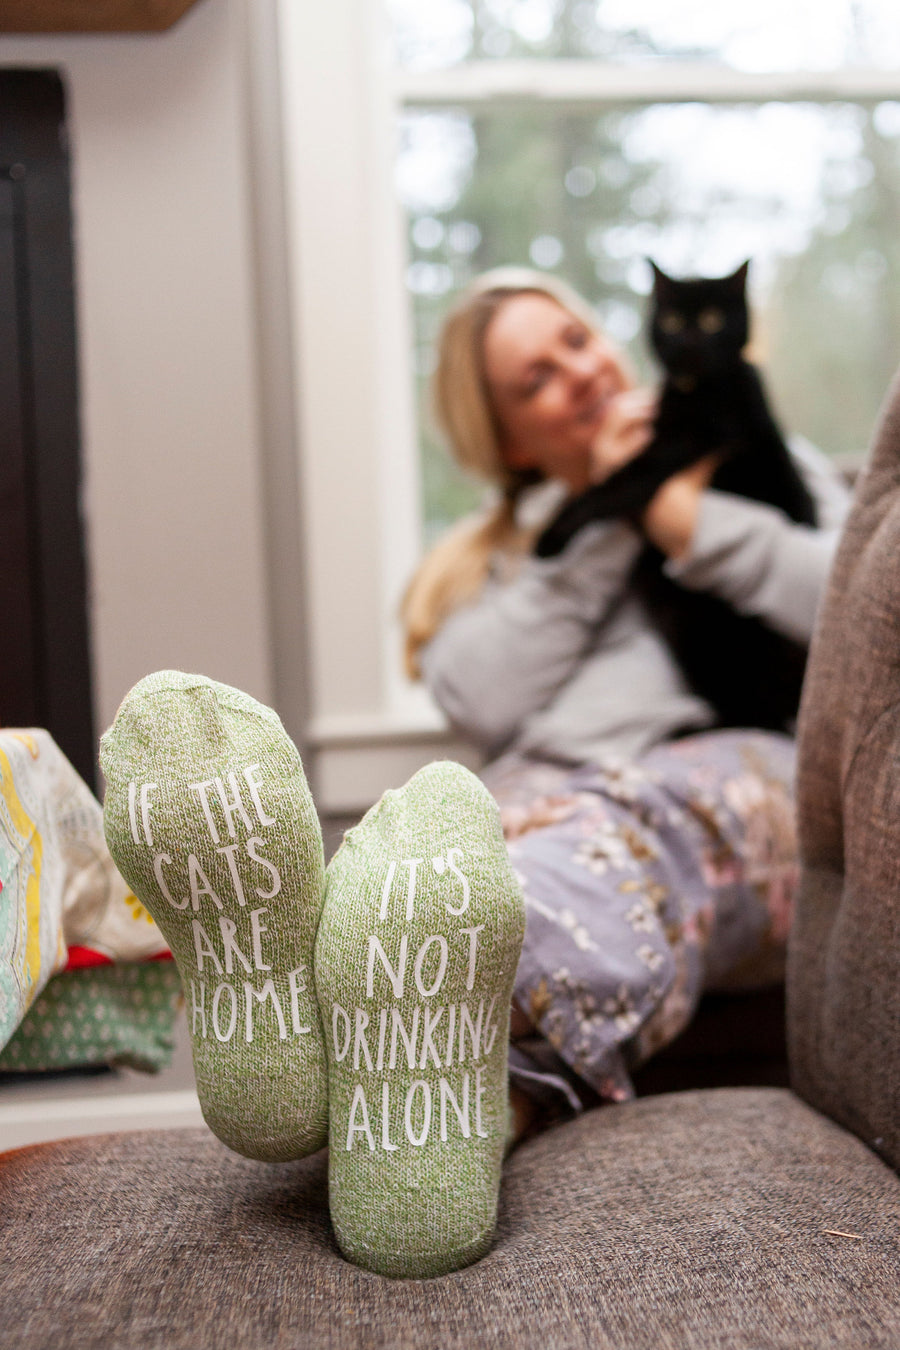 "It's Not Drinking Alone...If The Cats Are Home" Socks Women's Cat Lovers Gift